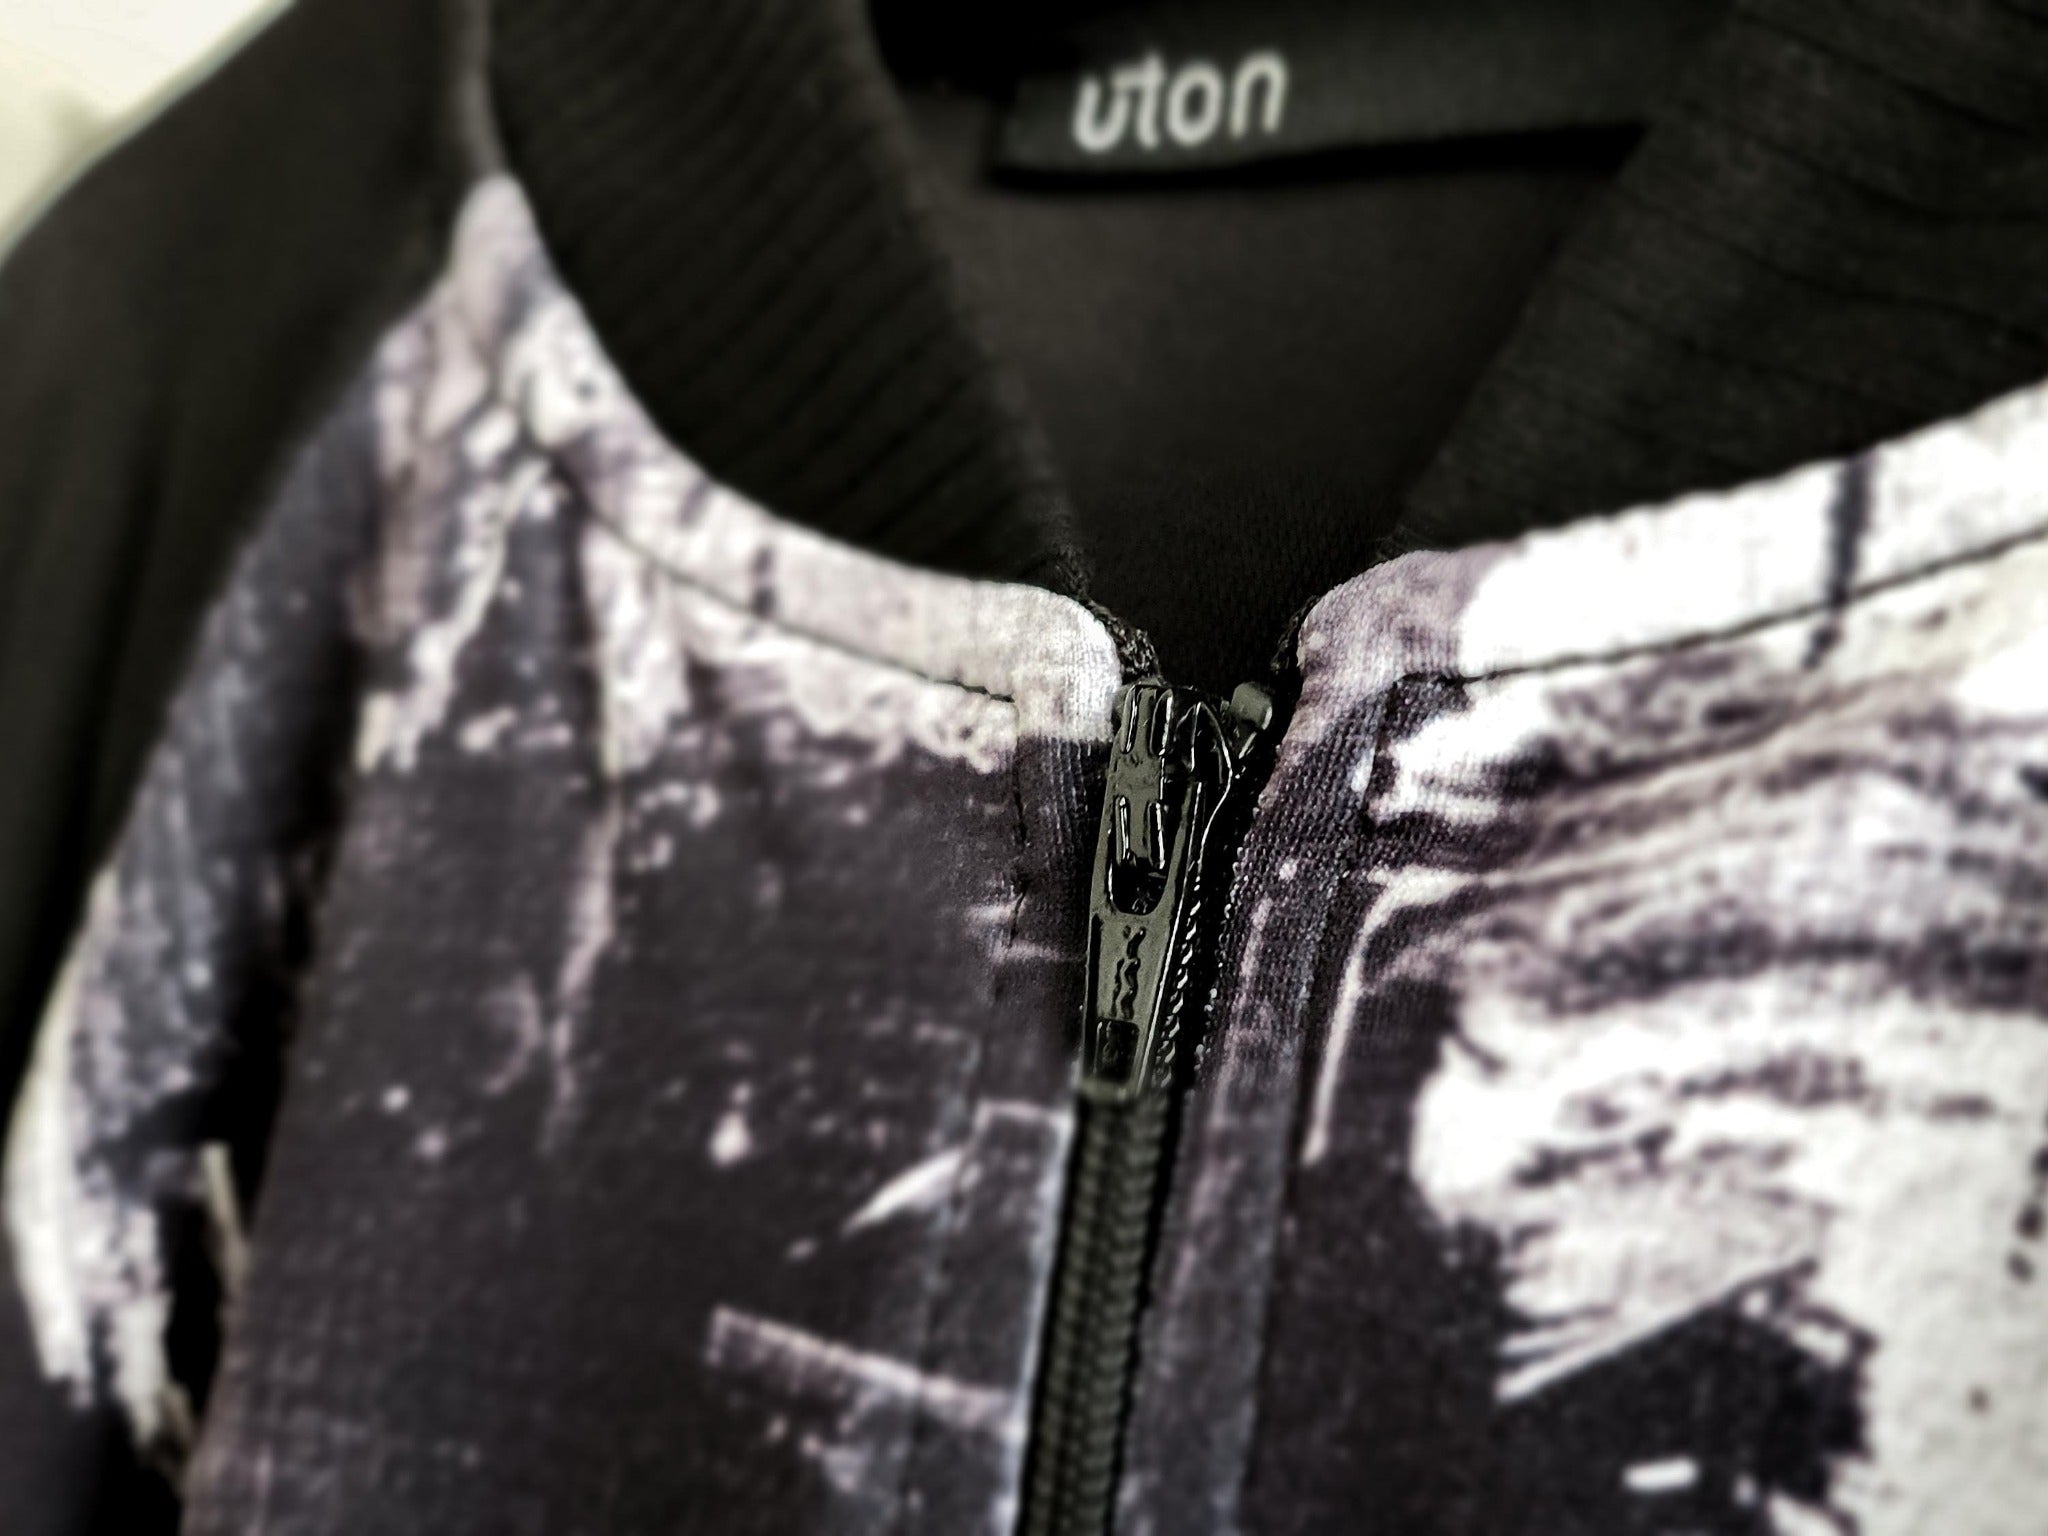 úton jackets - made from recycled polyester